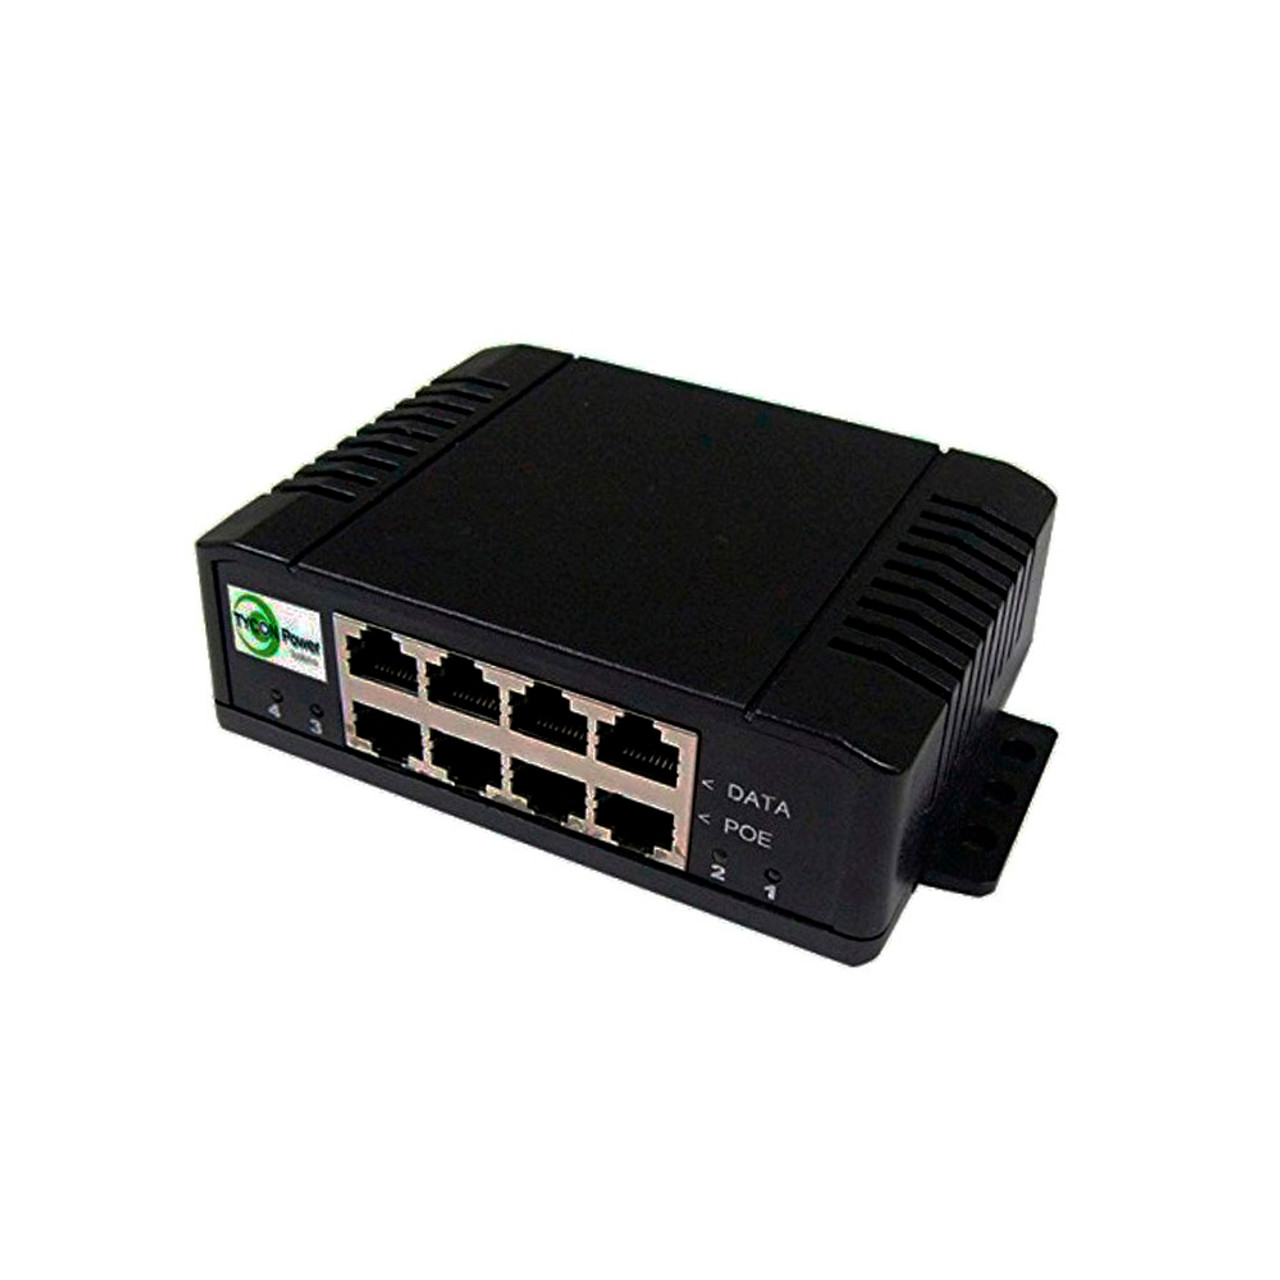 Tycon Mid Span. 1A per port. Gigabit PoE Injector. ports with 1-4 power  sources